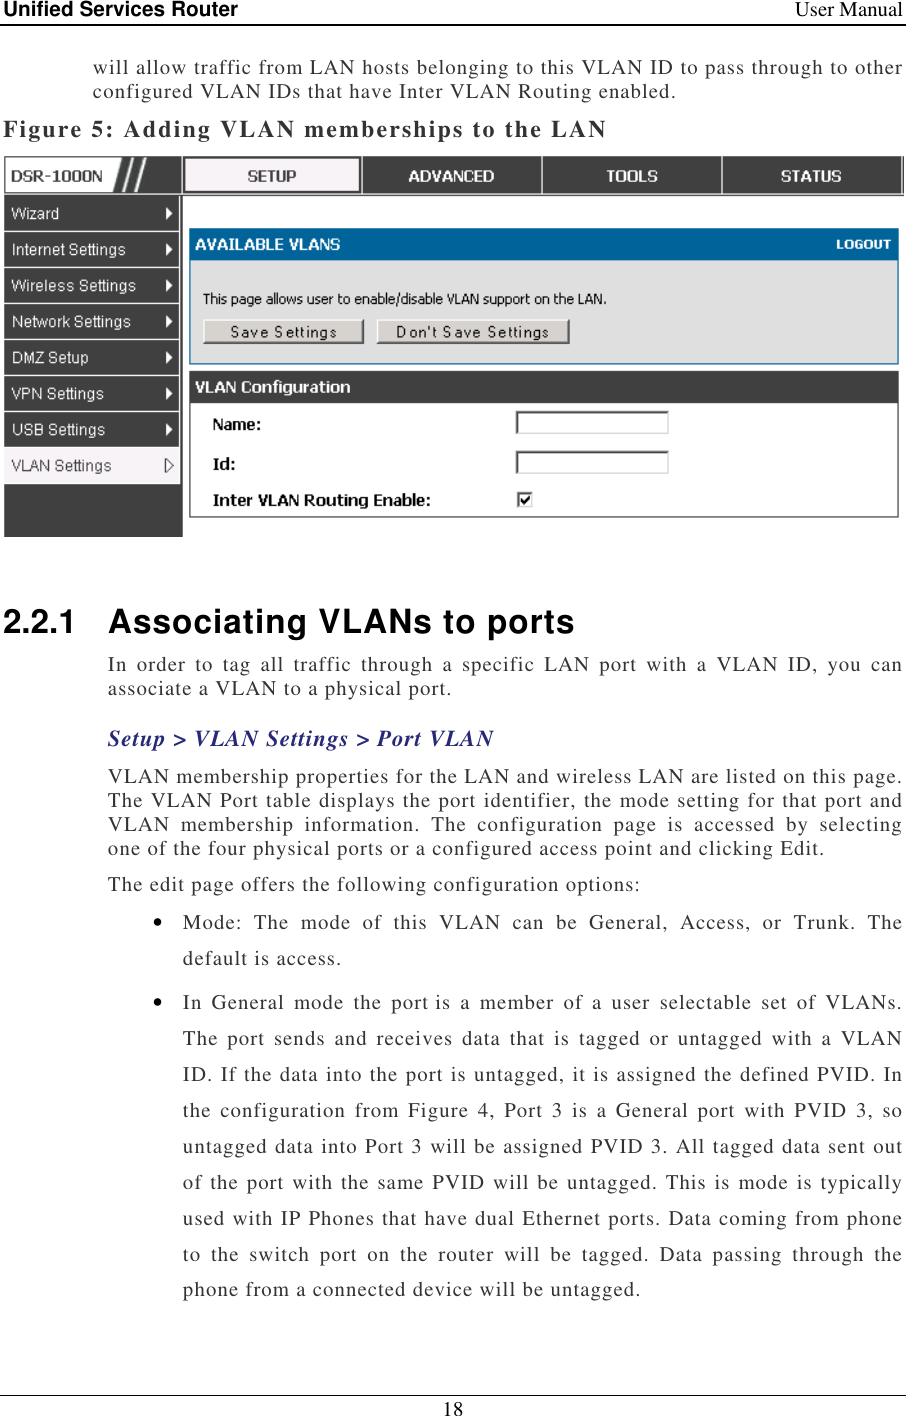 Unified Services Router    User Manual 18  will allow traffic from LAN hosts belonging to this VLAN ID to pass through to other configured VLAN IDs that have Inter VLAN Routing enabled.  Figure 5: Adding VLAN memberships to the LAN   2.2.1  Associating VLANs to ports In  order  to  tag  all  traffic  through  a  specific  LAN  port  with  a  VLAN  ID,  you  can associate a VLAN to a physical port.  Setup &gt; VLAN Settings &gt; Port VLAN VLAN membership properties for the LAN and wireless LAN are listed on this page. The VLAN Port table displays the port identifier, the mode setting for that port and VLAN  membership  information.  The  configuration  page  is  accessed  by  selecting one of the four physical ports or a configured access point and clicking Edit.  The edit page offers the following configuration options: • Mode:  The  mode  of  this  VLAN  can  be  General,  Access,  or  Trunk.  The default is access. • In  General  mode  the  port is  a  member  of  a  user  selectable  set  of  VLANs. The  port  sends  and  receives  data  that  is  tagged  or  untagged  with  a  VLAN ID. If the data into the port is untagged, it is assigned the defined PVID. In the  configuration  from  Figure  4,  Port  3  is  a  General  port  with  PVID  3,  so untagged data into Port 3 will be assigned PVID 3. All tagged data sent out of the port with the same PVID  will be untagged. This is  mode is typically used with IP Phones that have dual Ethernet ports. Data coming from phone to  the  switch  port  on  the  router  will  be  tagged.  Data  passing  through  the phone from a connected device will be untagged.  